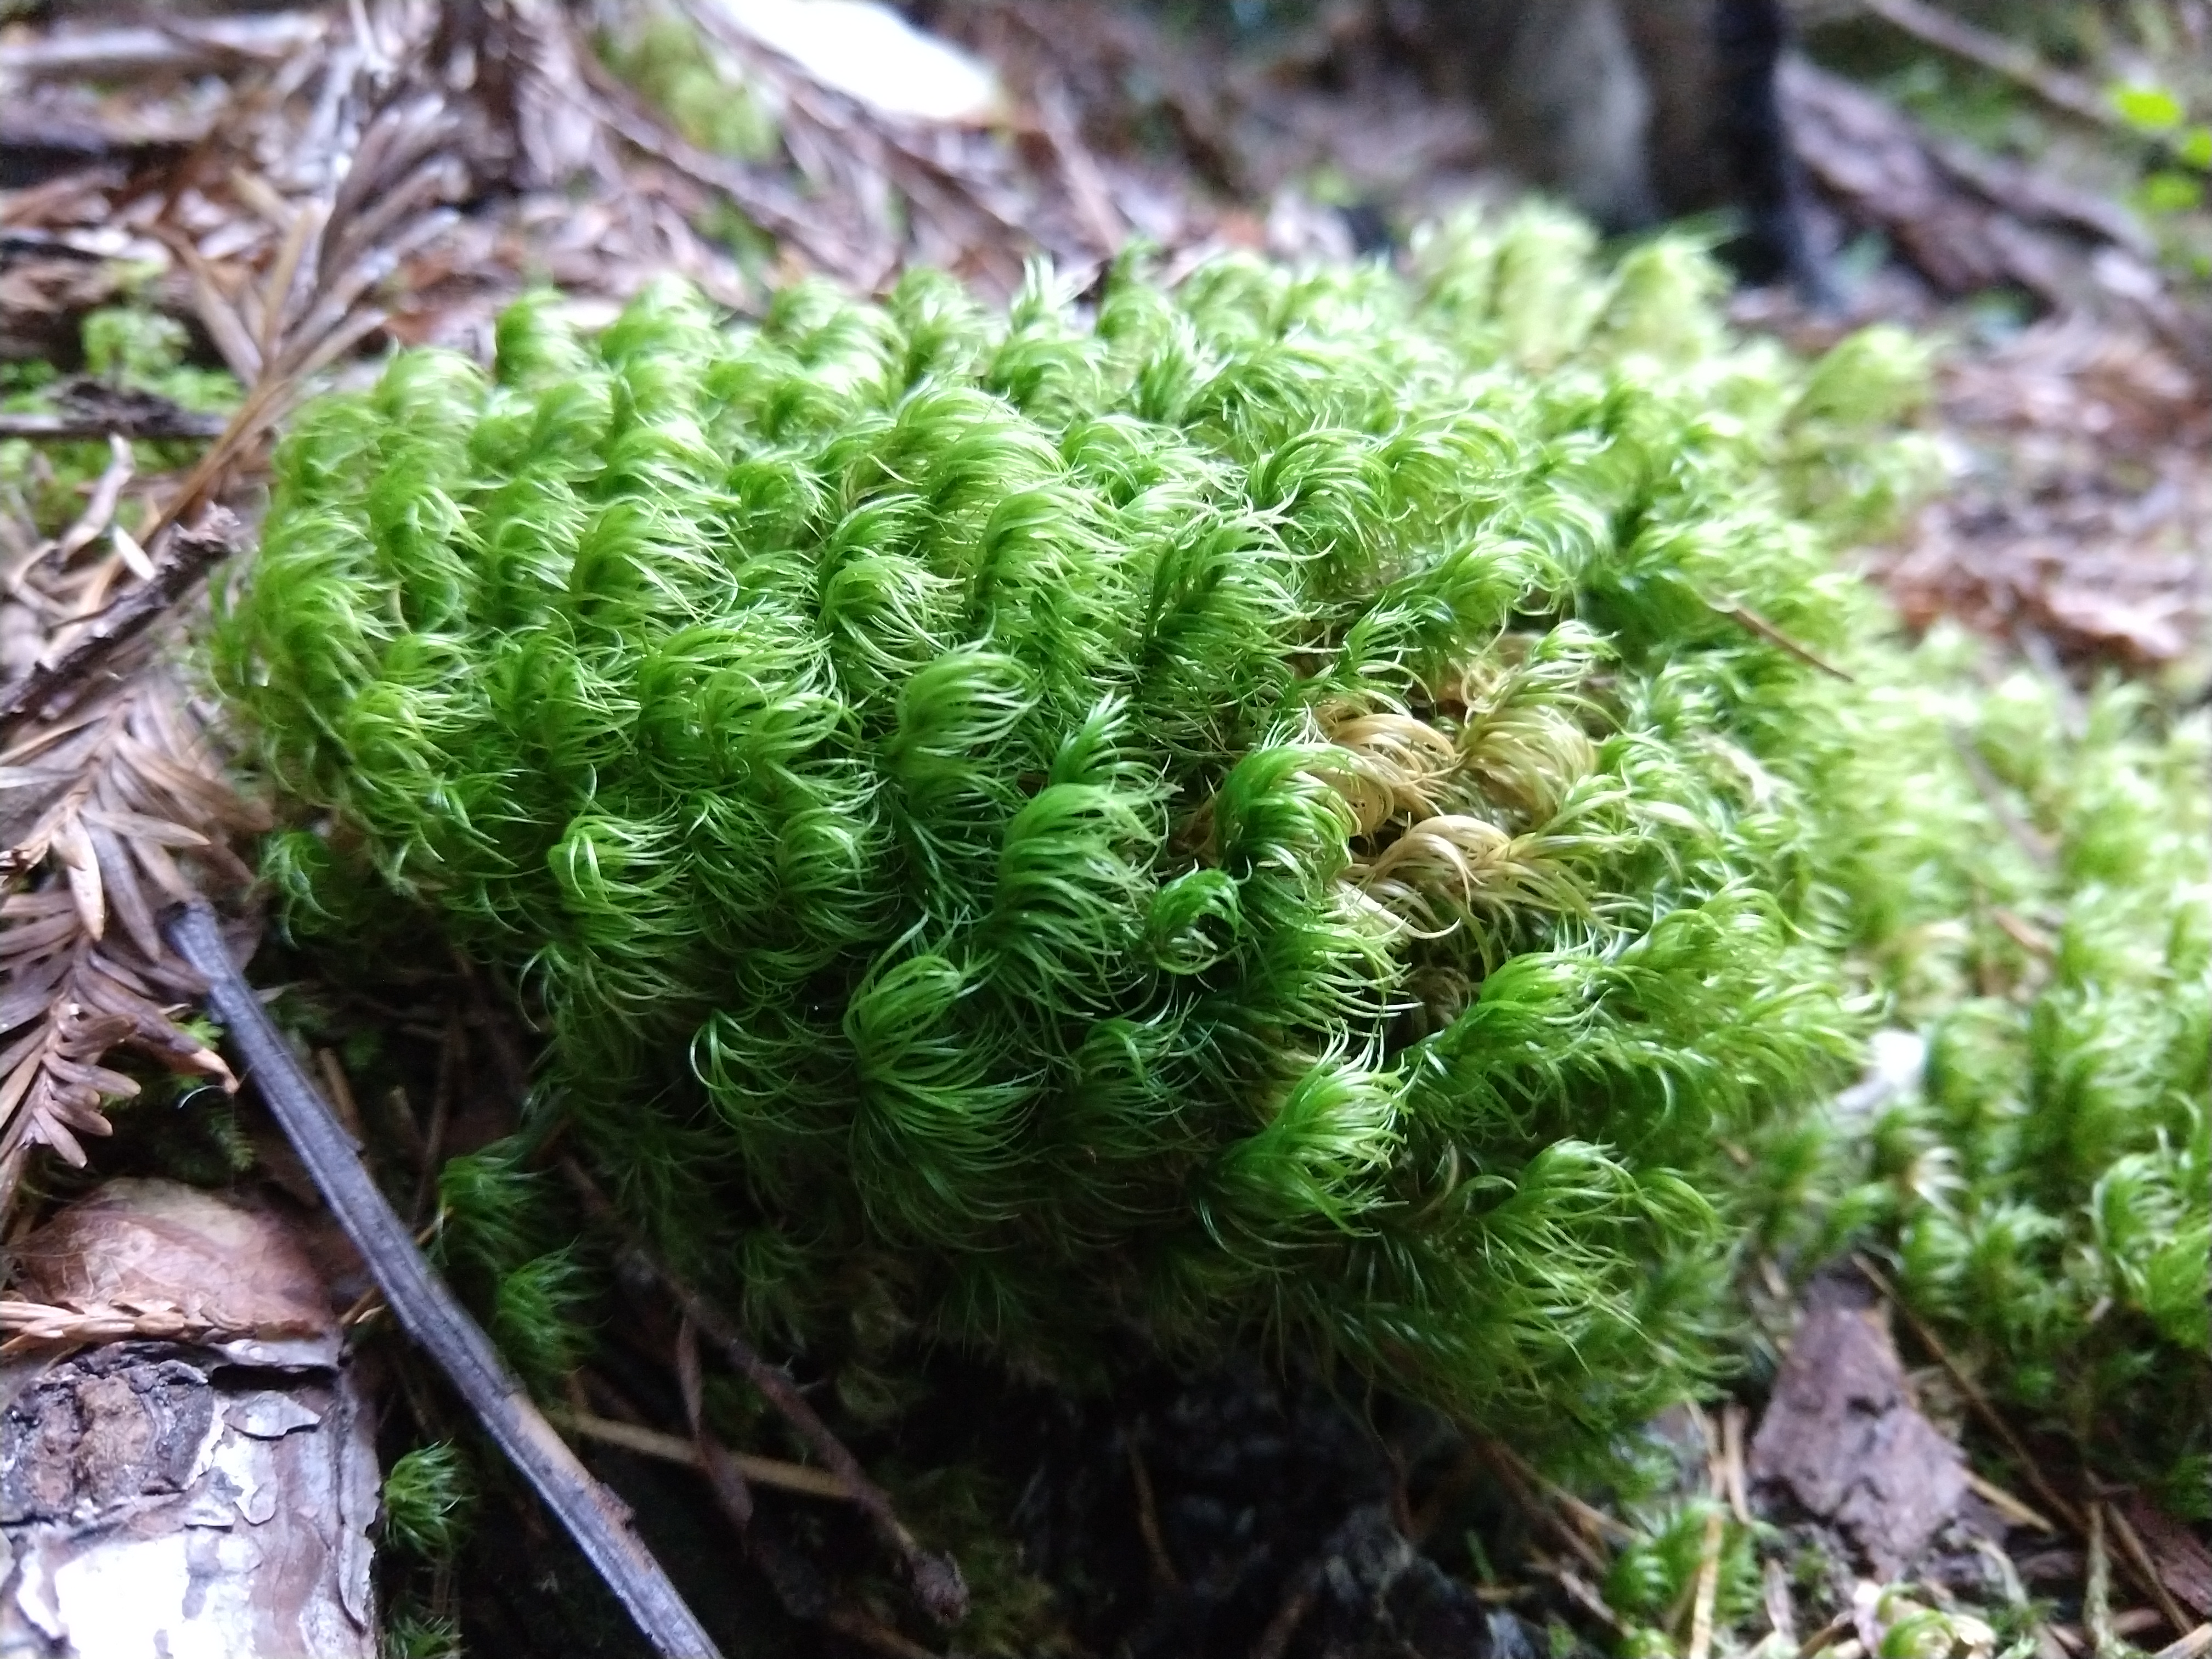 A group of moss gametophytes